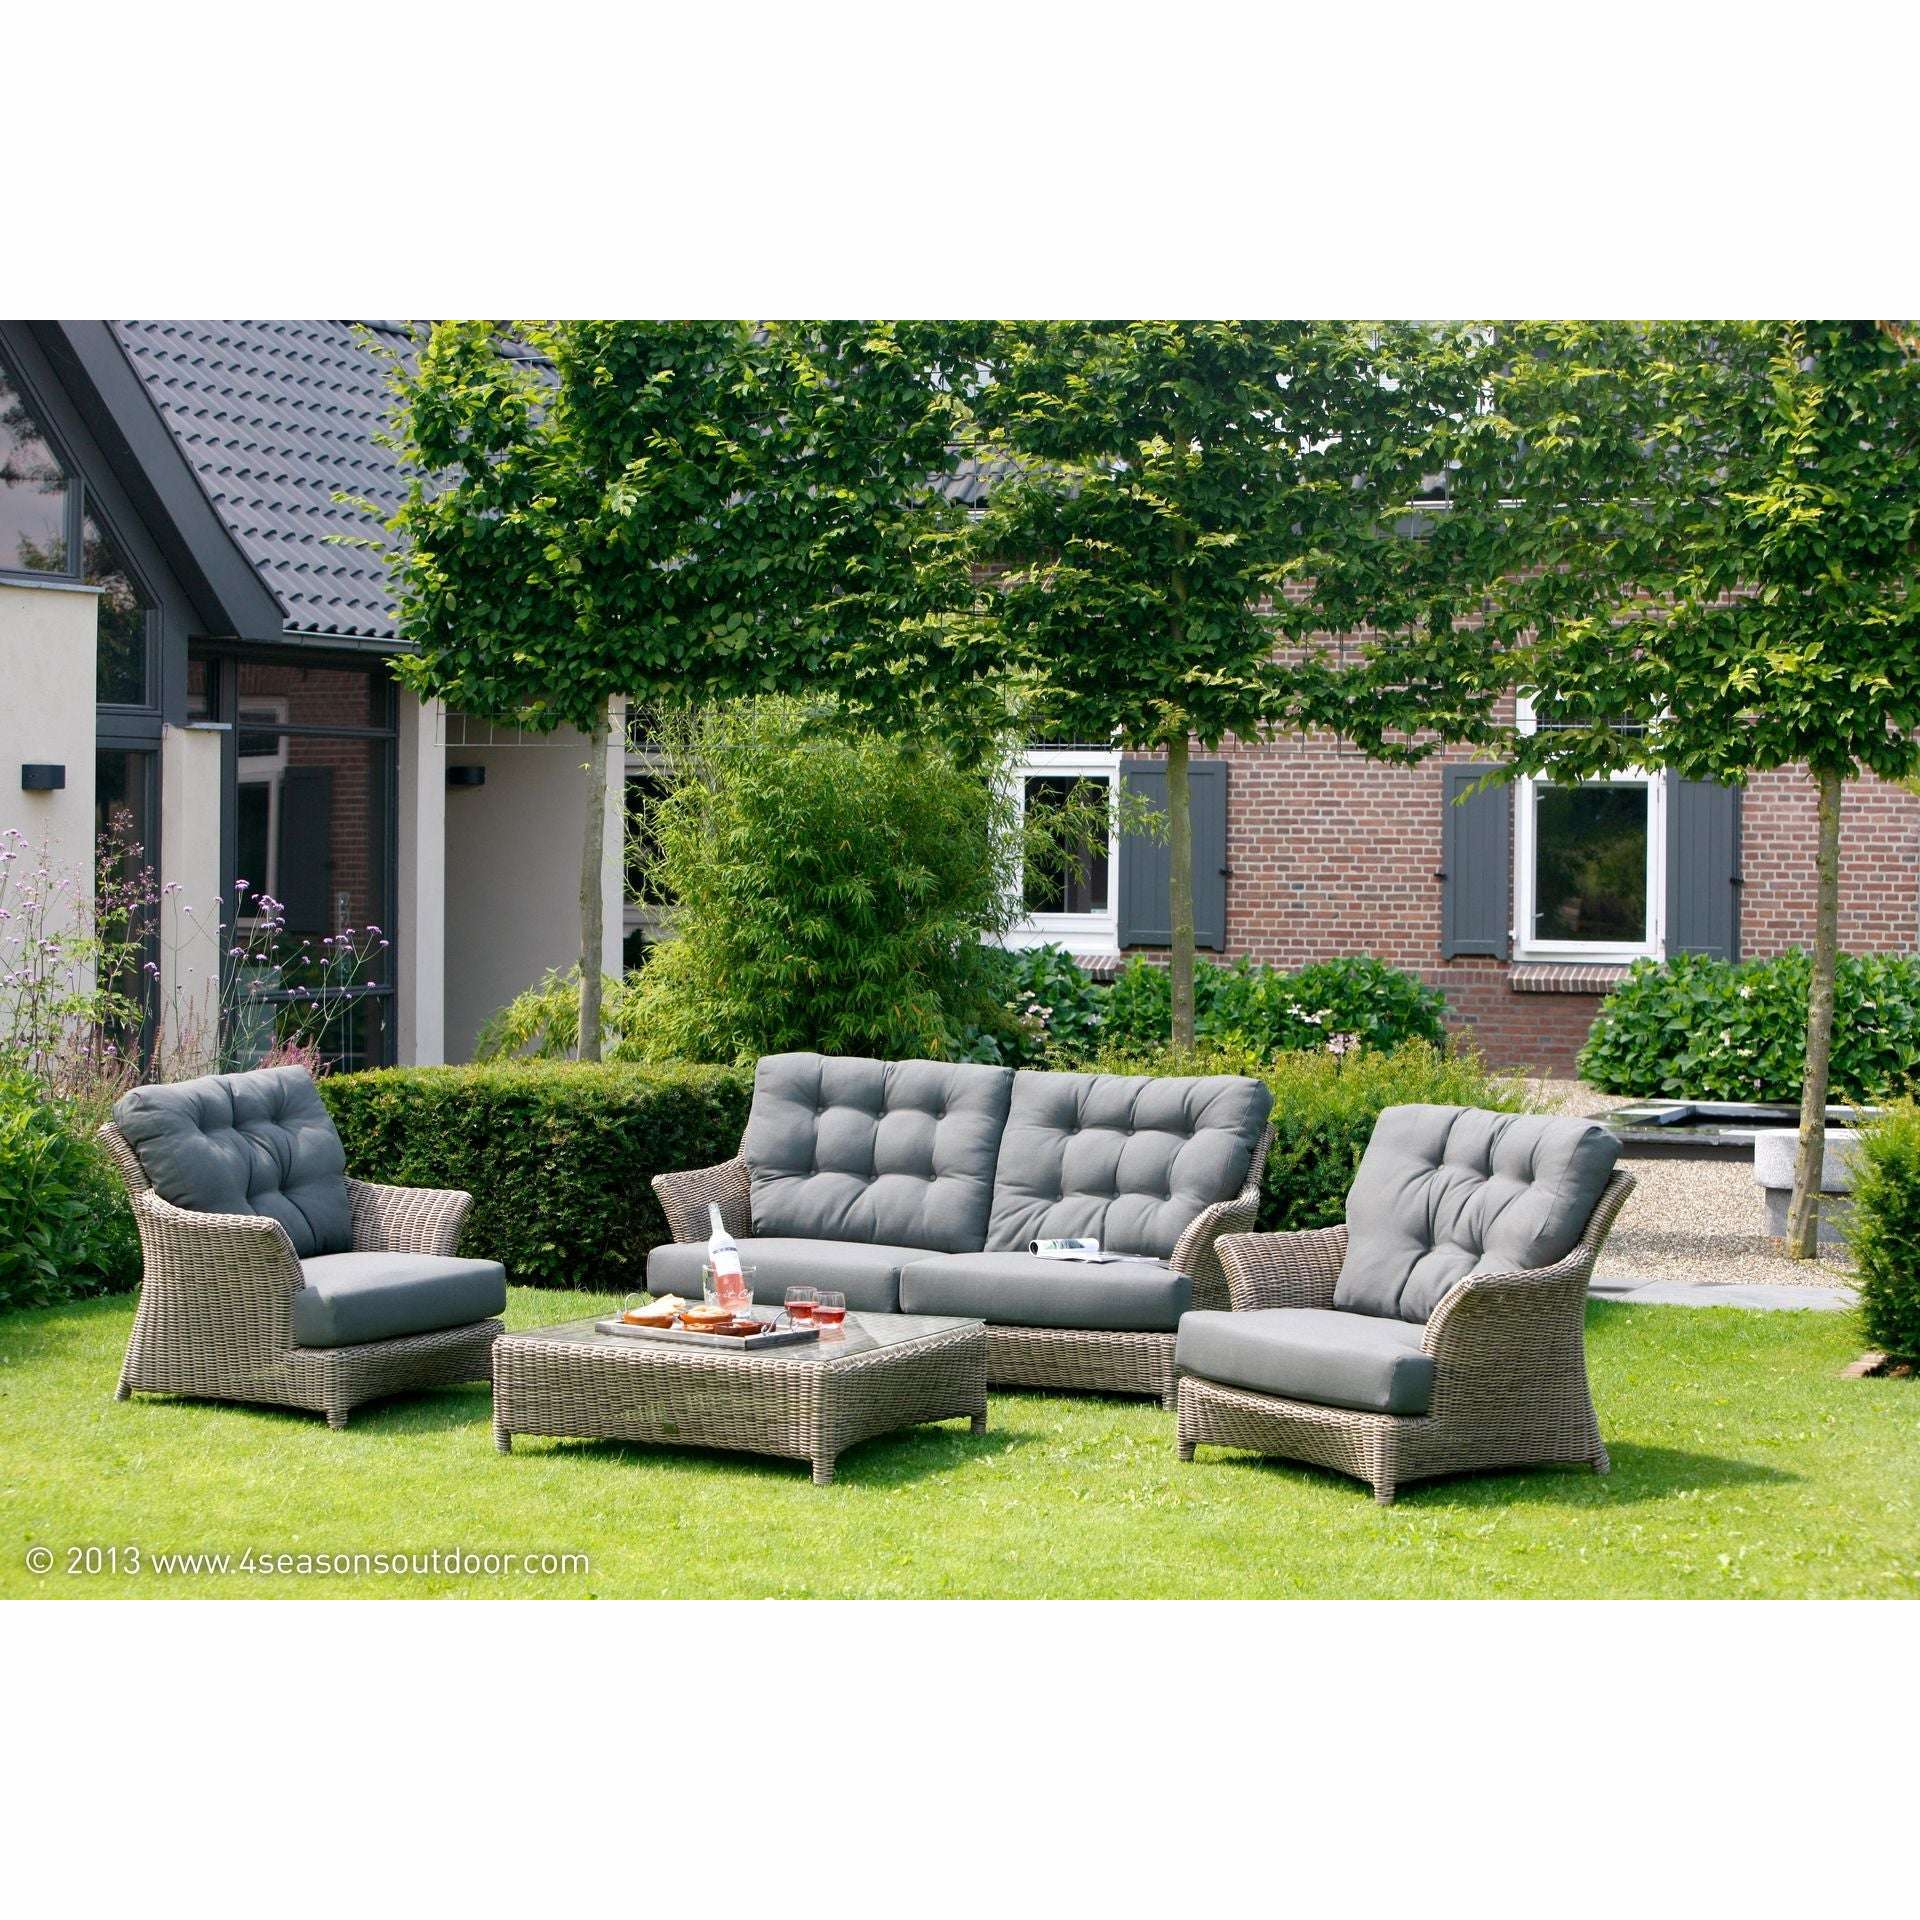 Exceptional Garden:4 Seasons Outdoor Valentine Lounge Group with Coffee Table